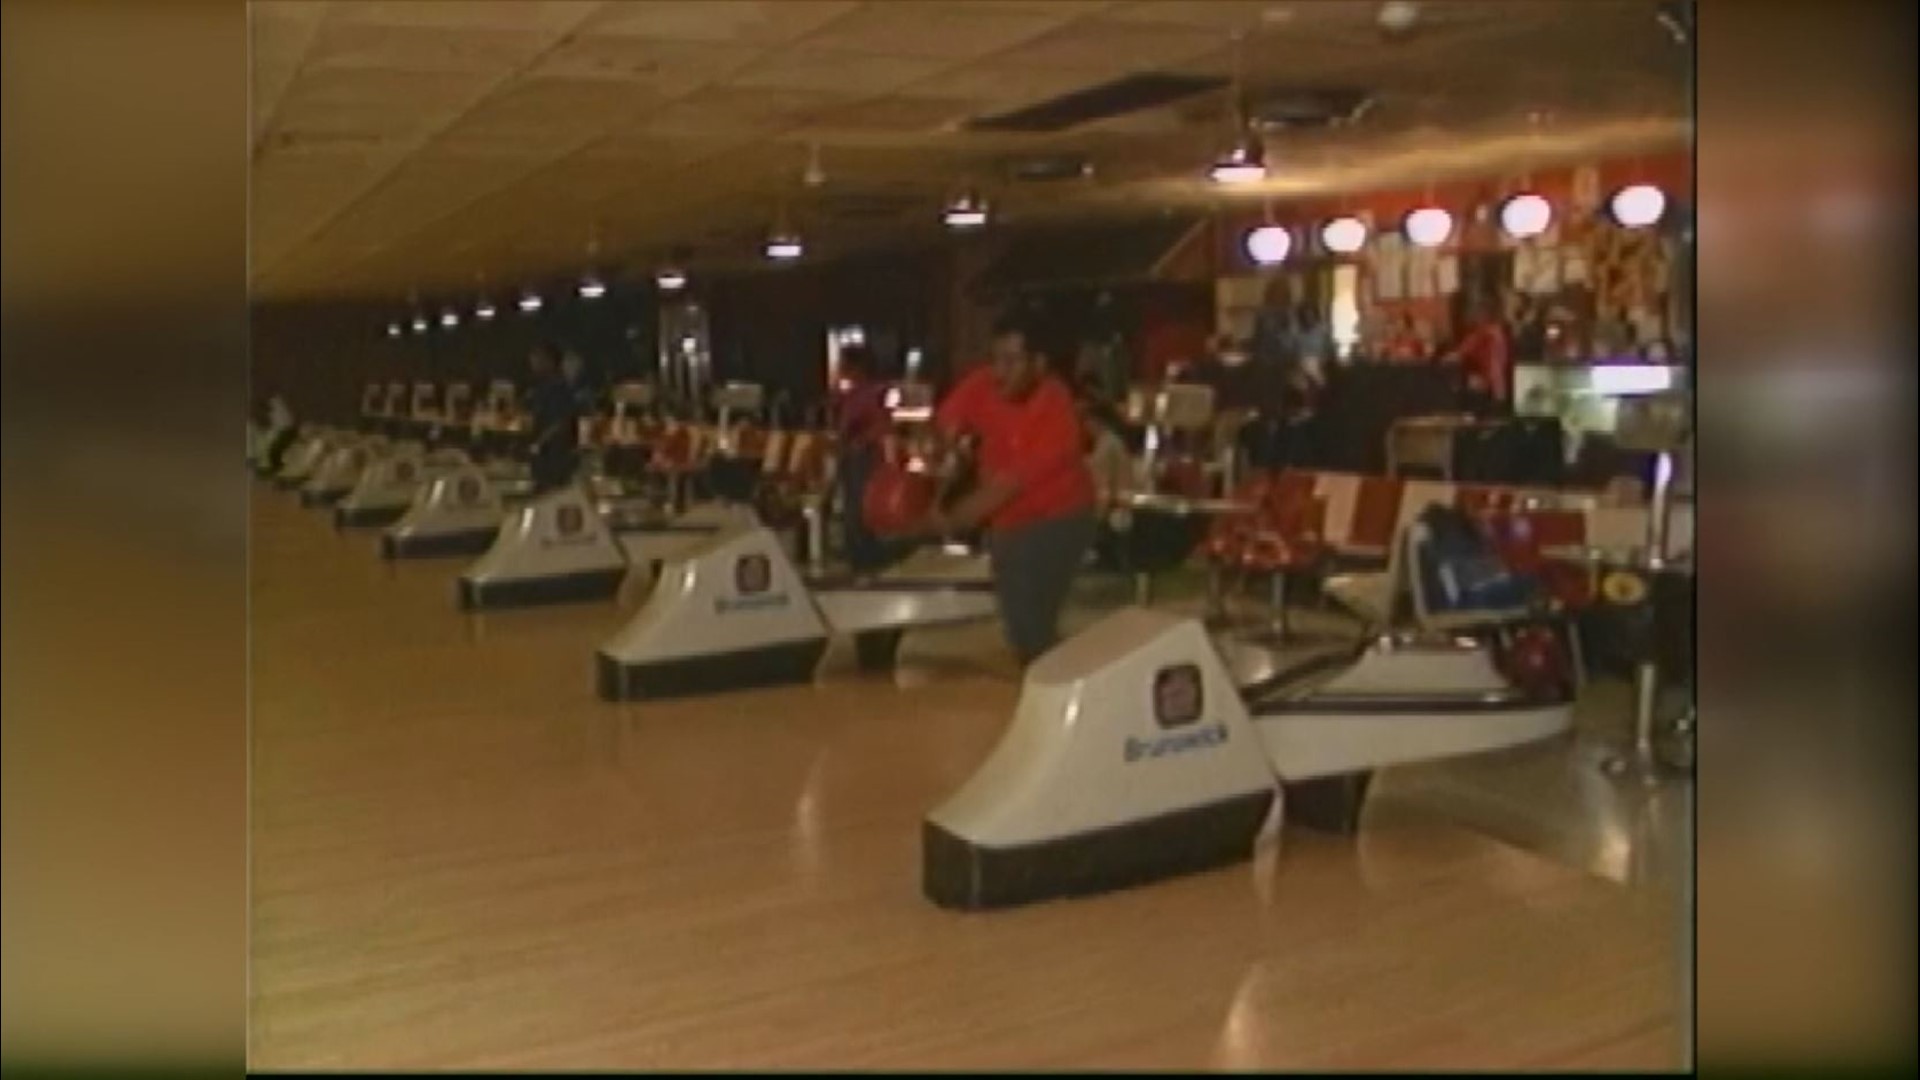 As Toledo Eleven’s Gregg Lindemulder shows us, the new bowling centers began to offer mmuch more than the usual oiled lanes and rented shoes.